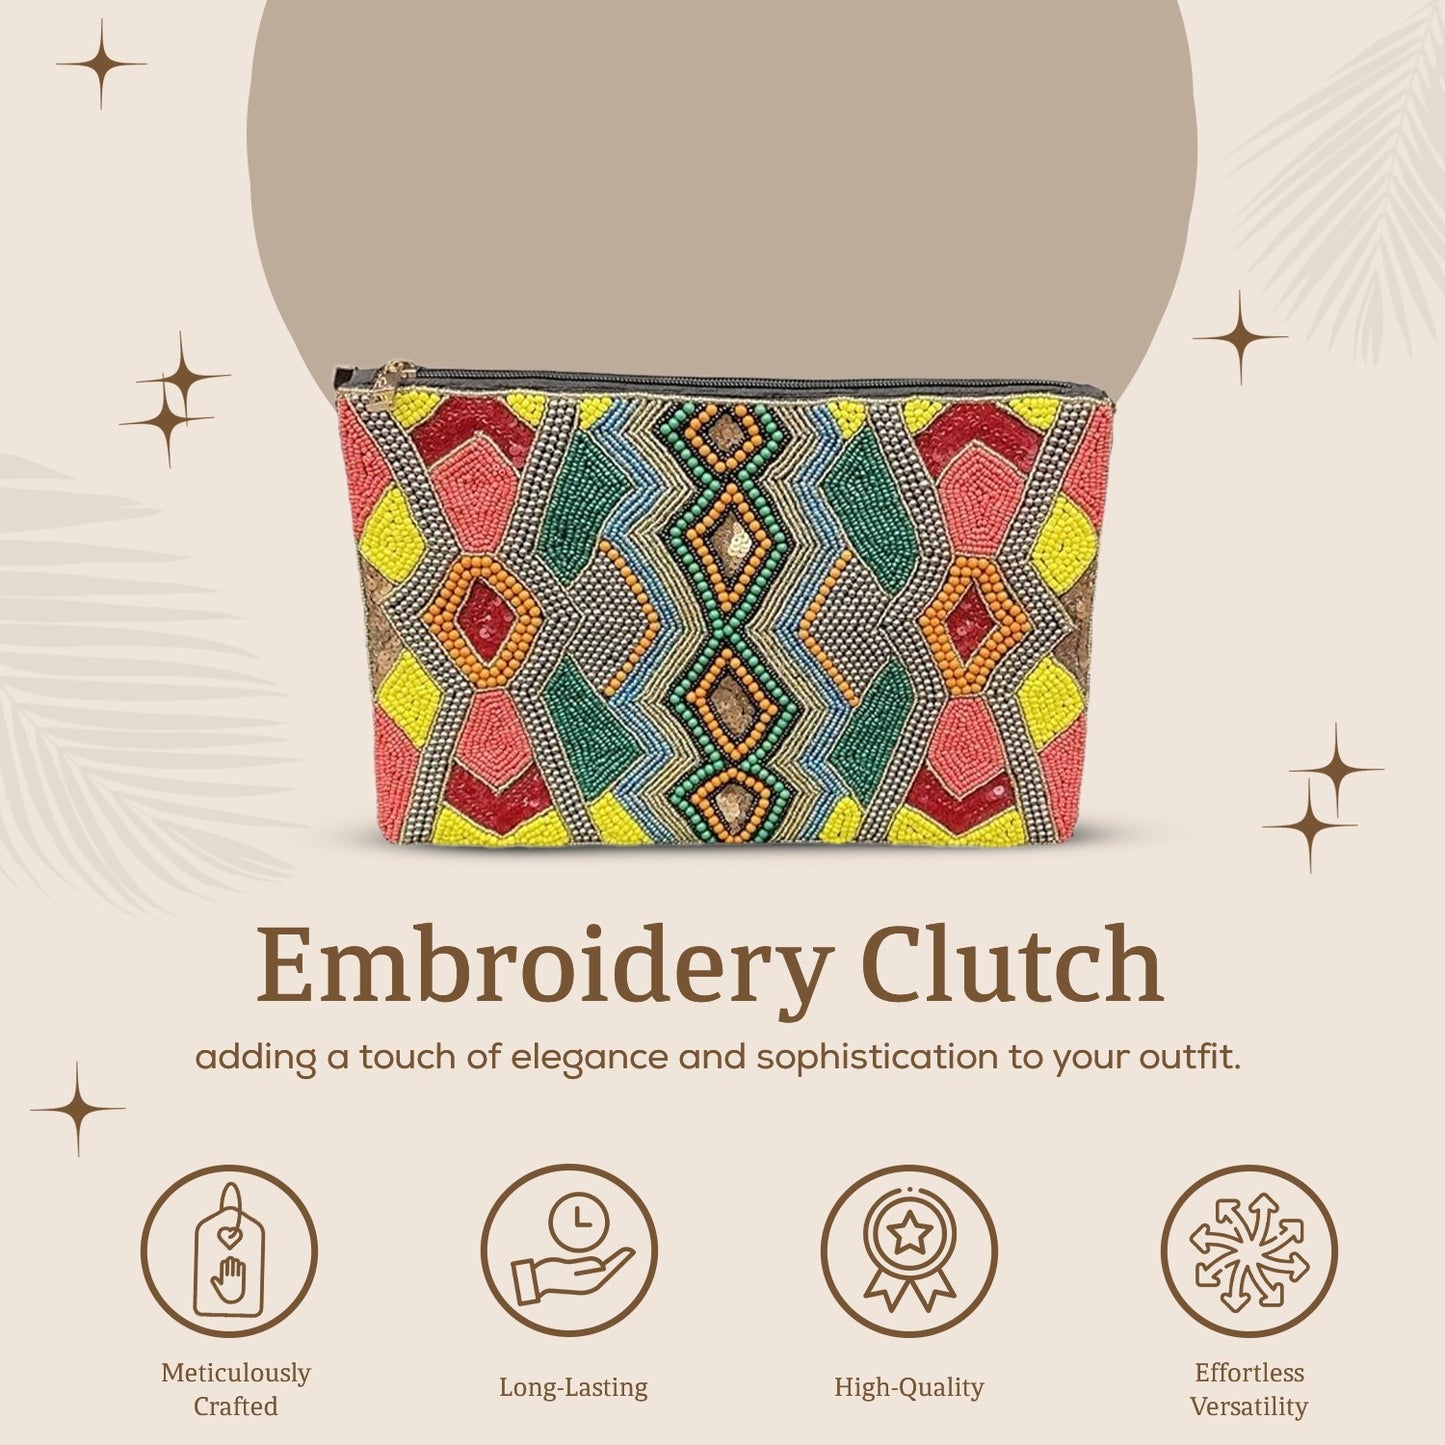 HHH Designs Embroidery Clutch Having Front side Embroidery and Plain Back, Elegant Embroidered Clutch with Front Beading and Crossbody Option